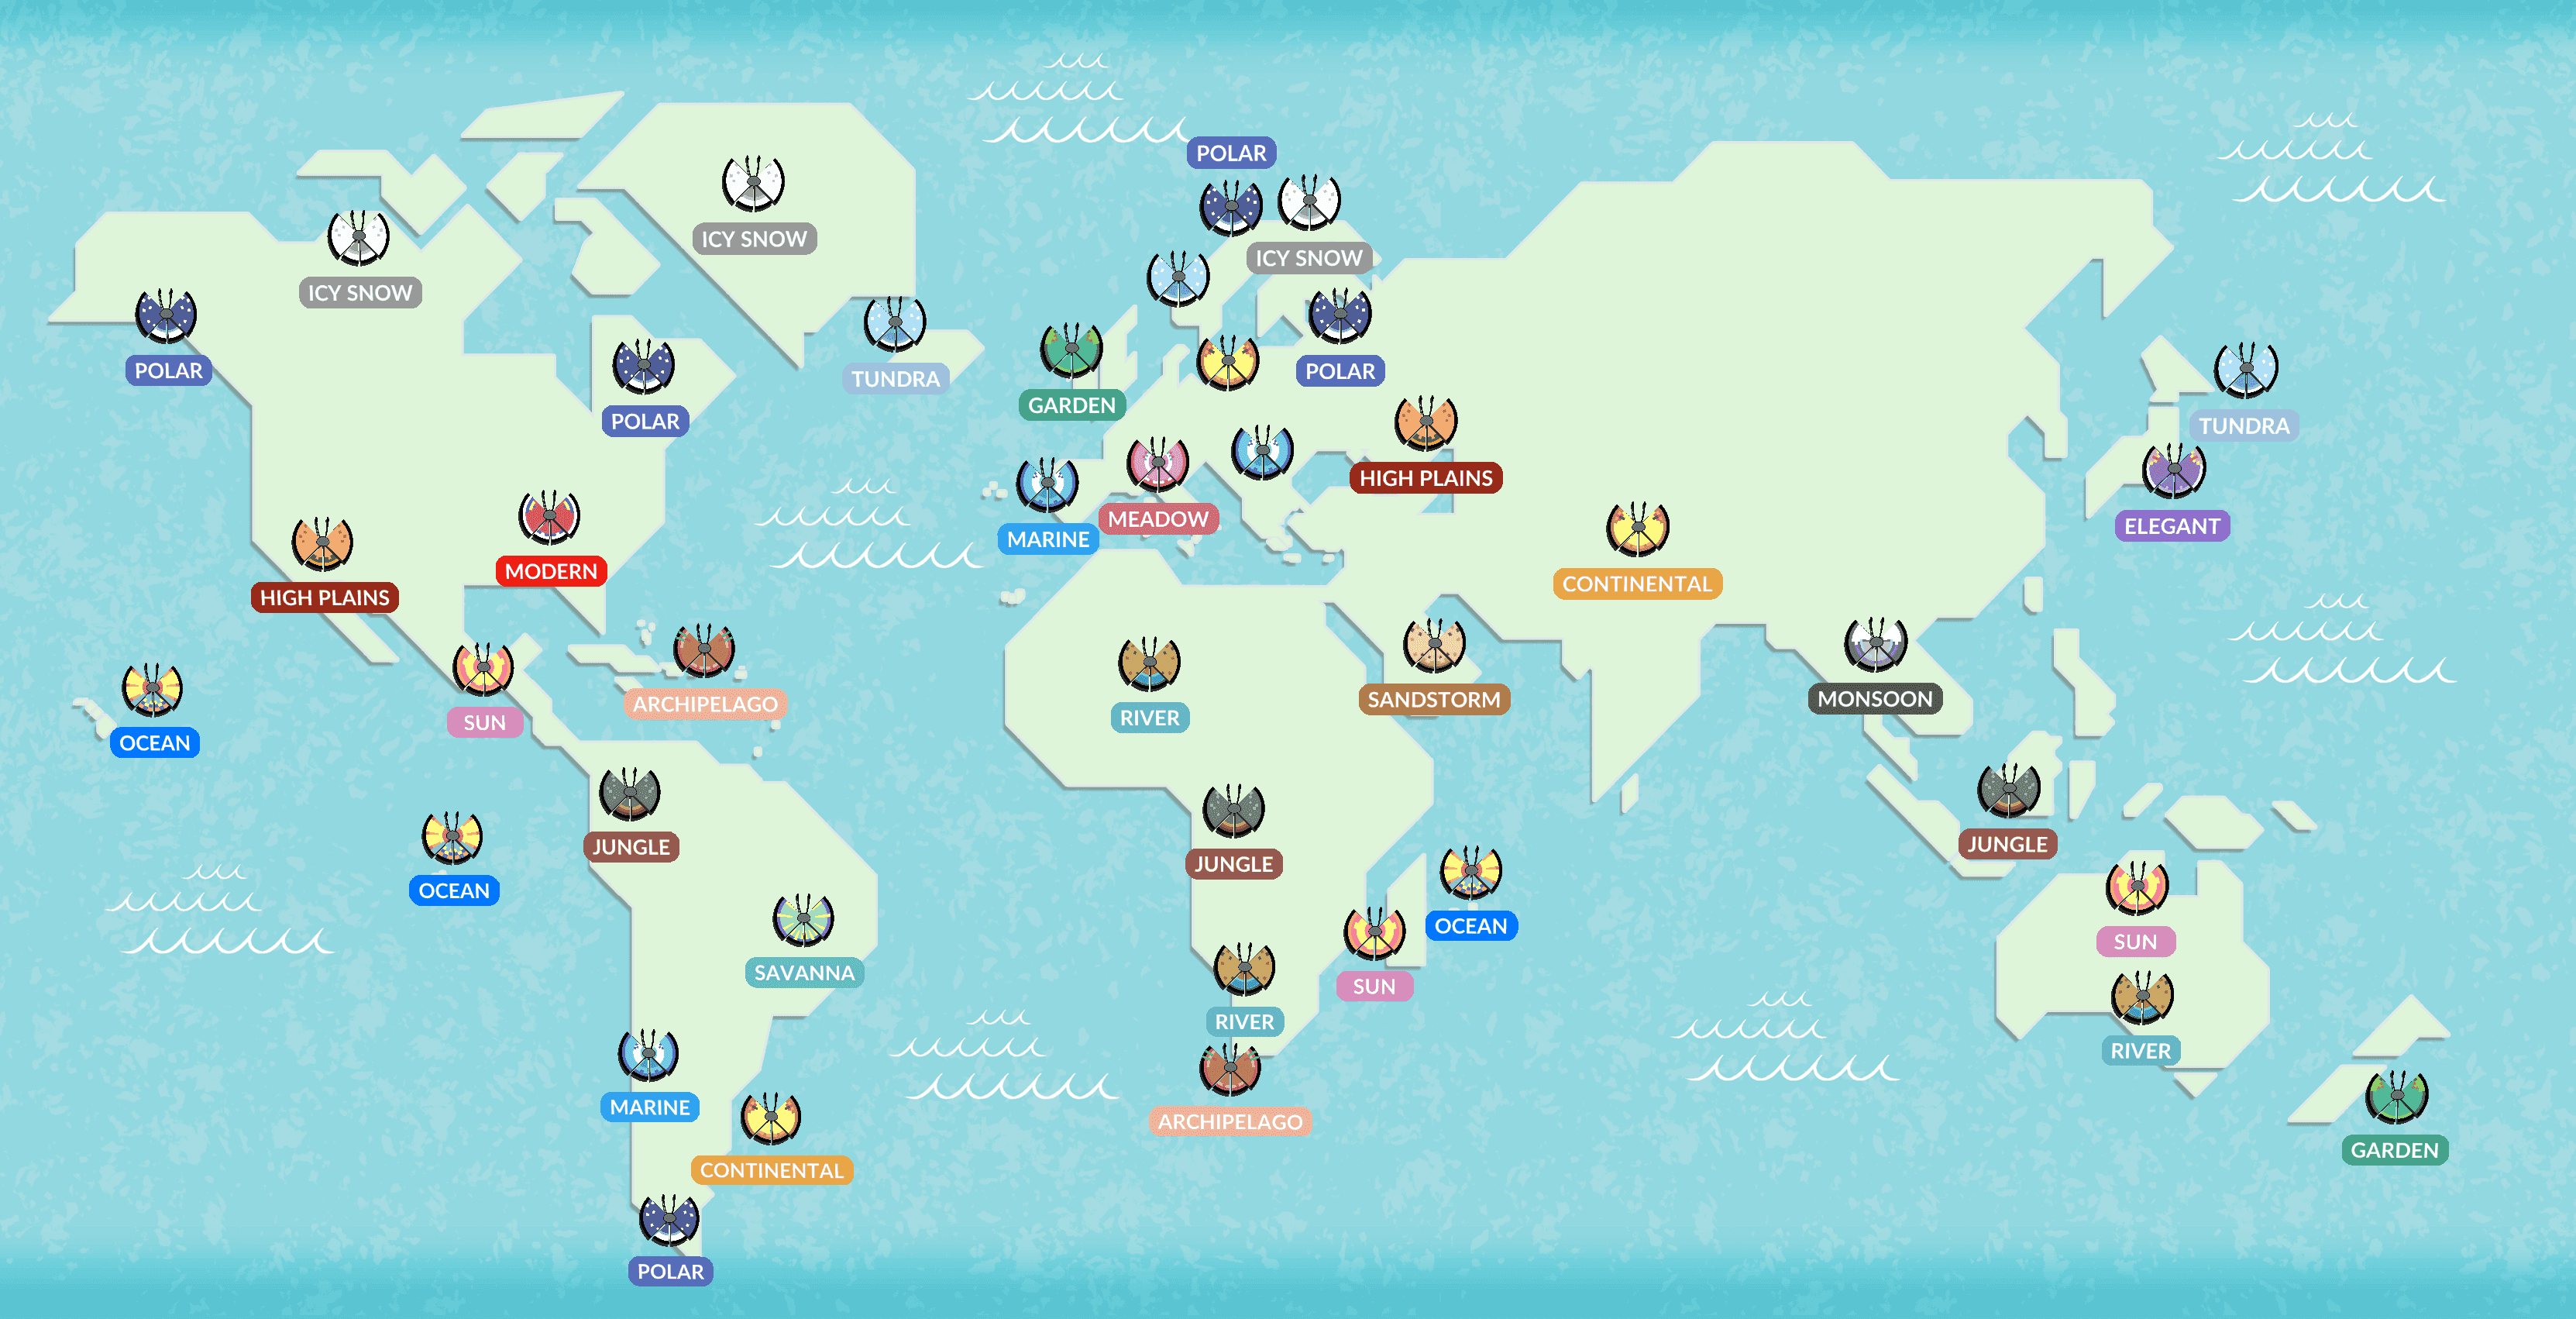 A map of the world from Pokémon GO developers: Niantic. It shows all of the different locations the different forms of Vivillon are from